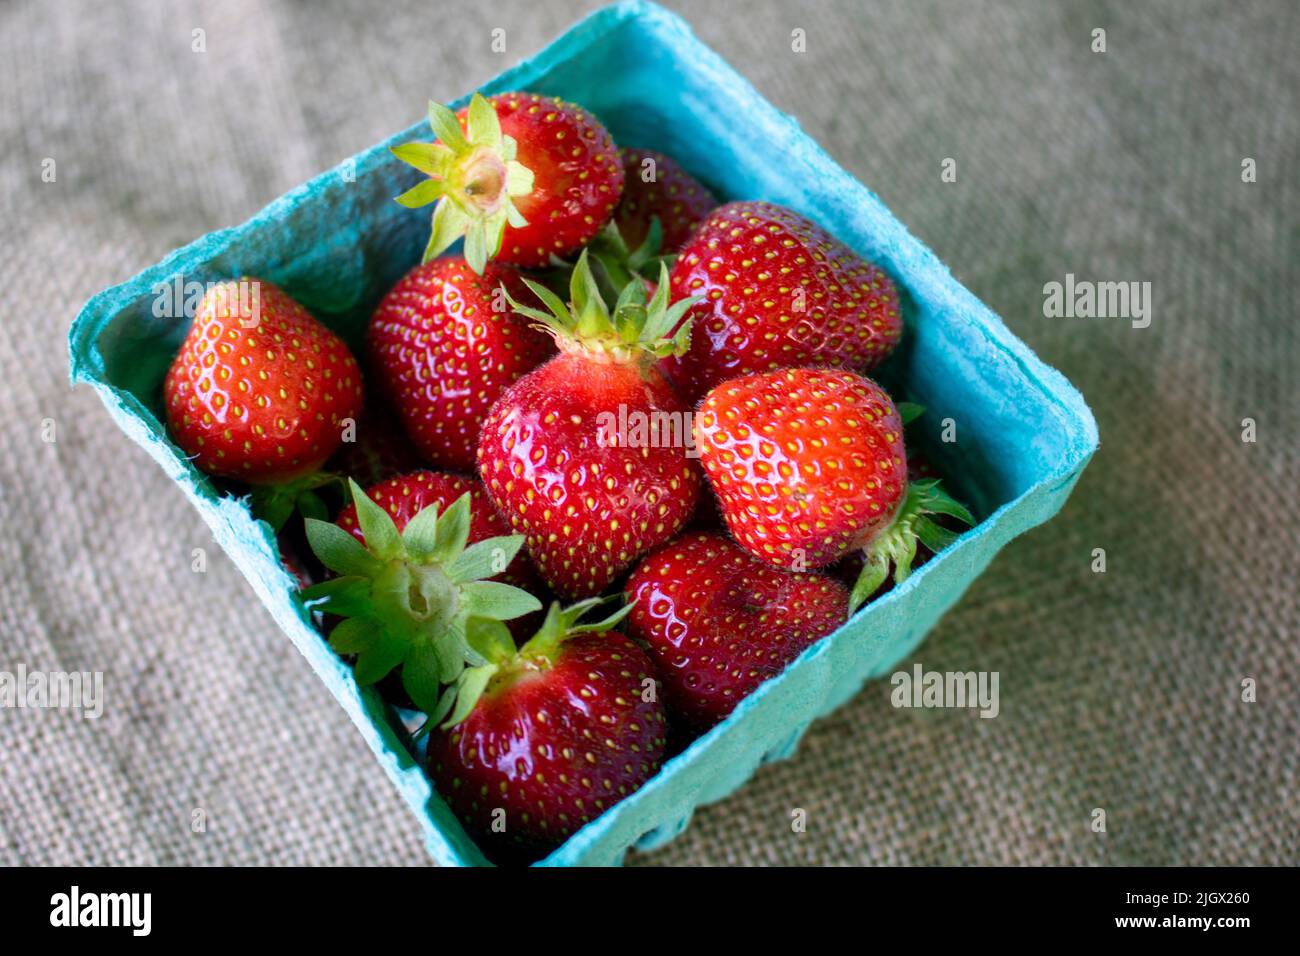 freshly picked strawberries in a teal punnets at a framers market outdoors on a burlap table cloth Stock Photo